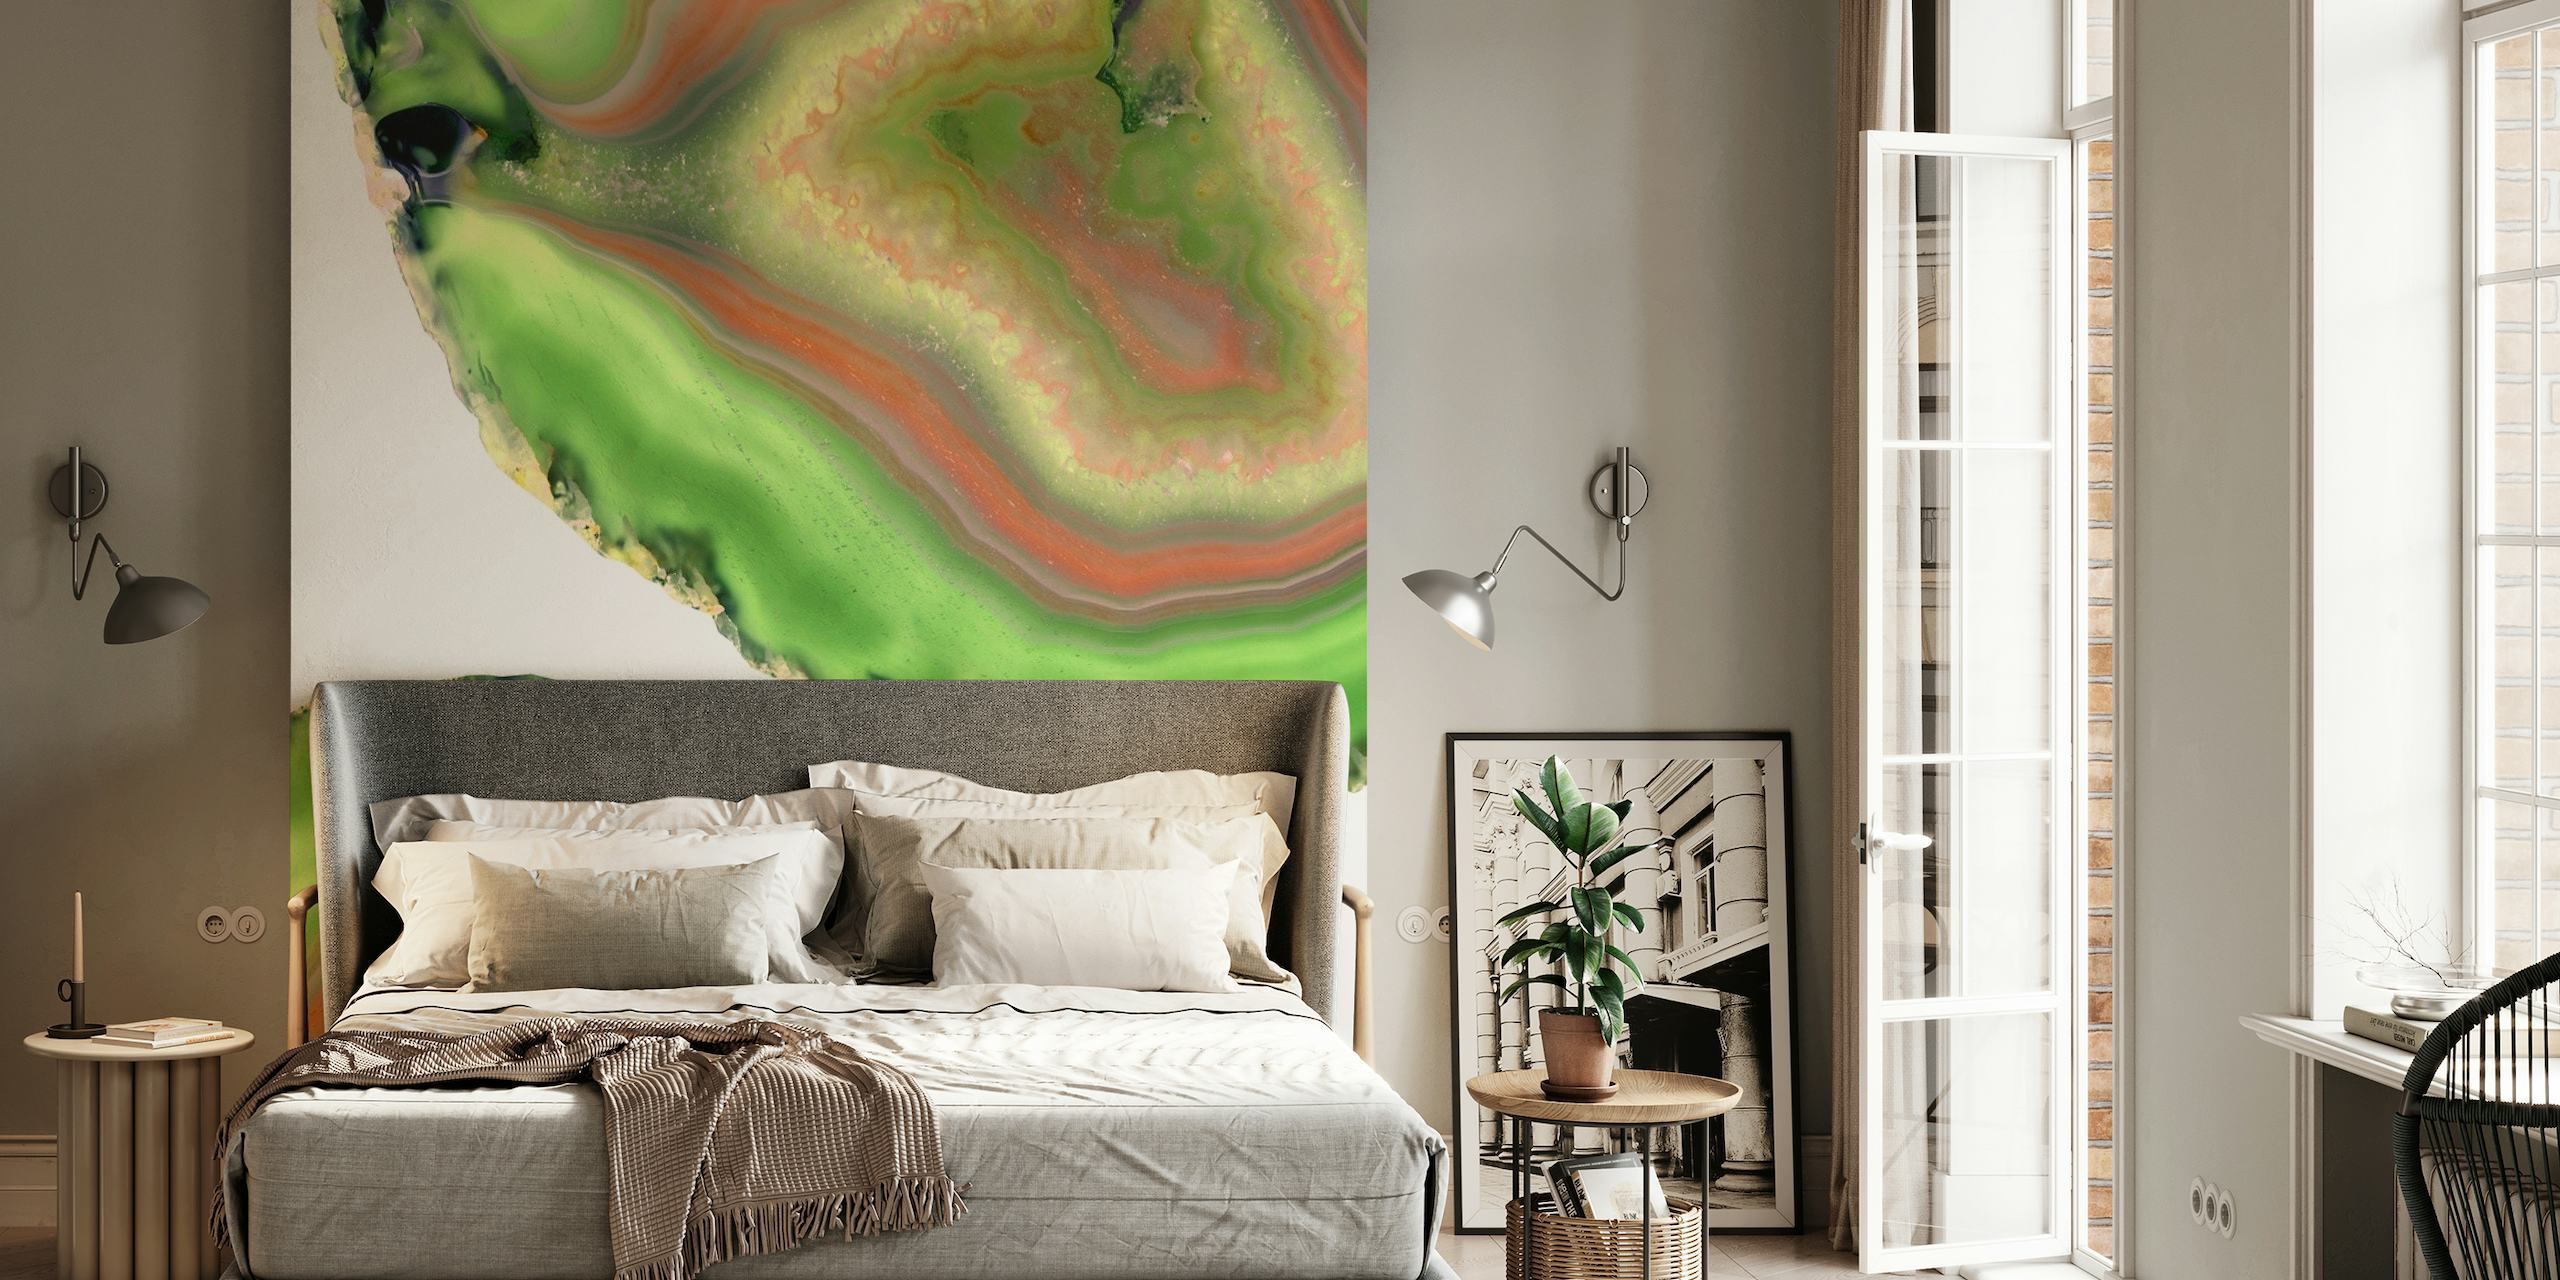 Agate stone pattern wall mural with green, rust, and purple hues